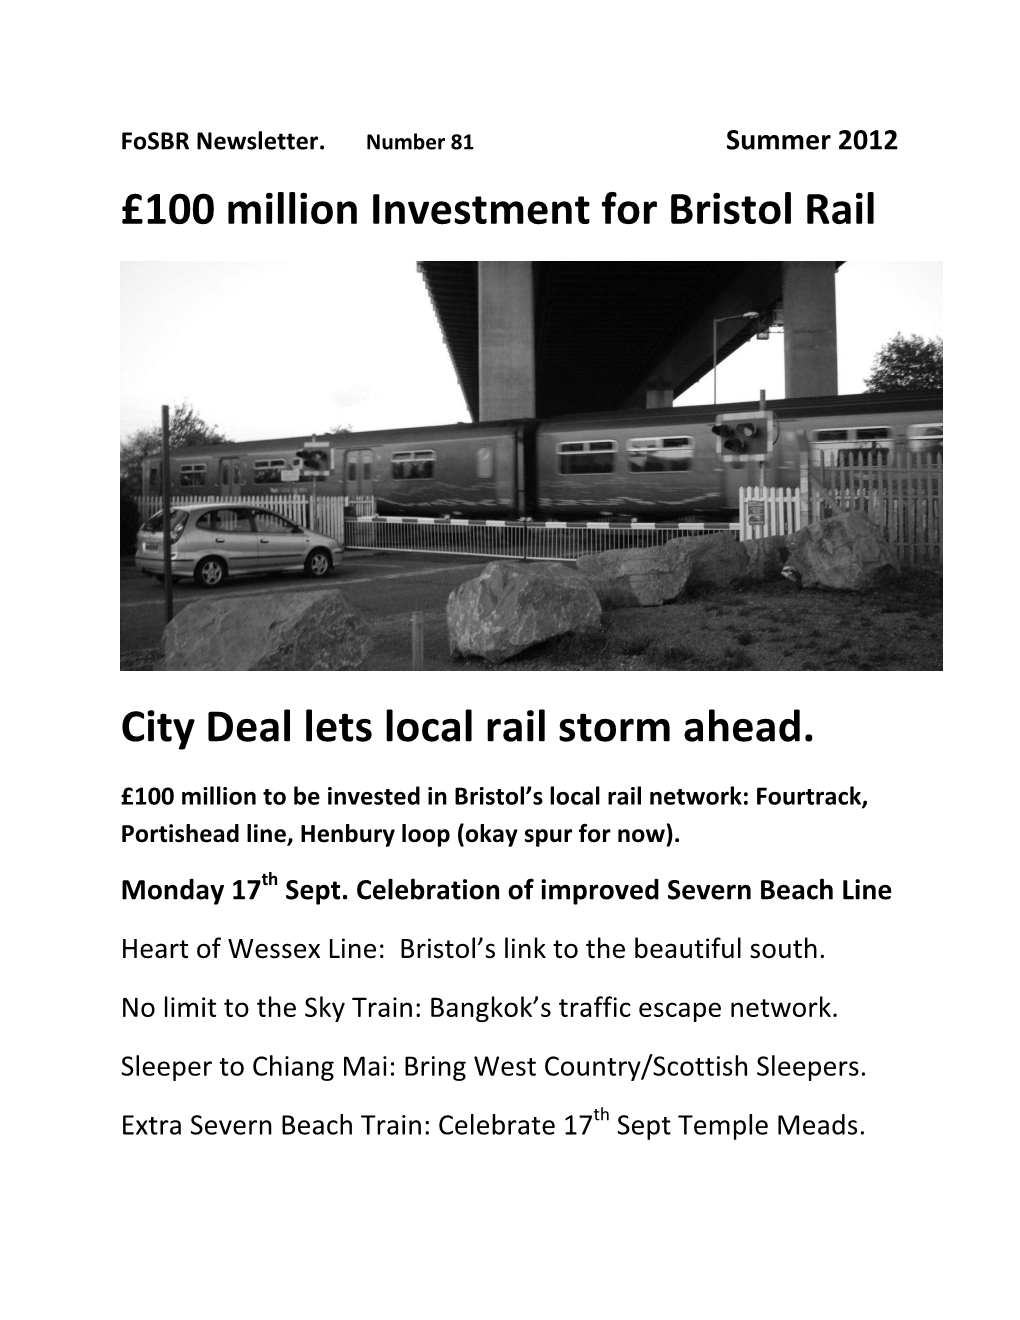 100 Million Investment for Bristol Rail City Deal Lets Local Rail Storm Ahead